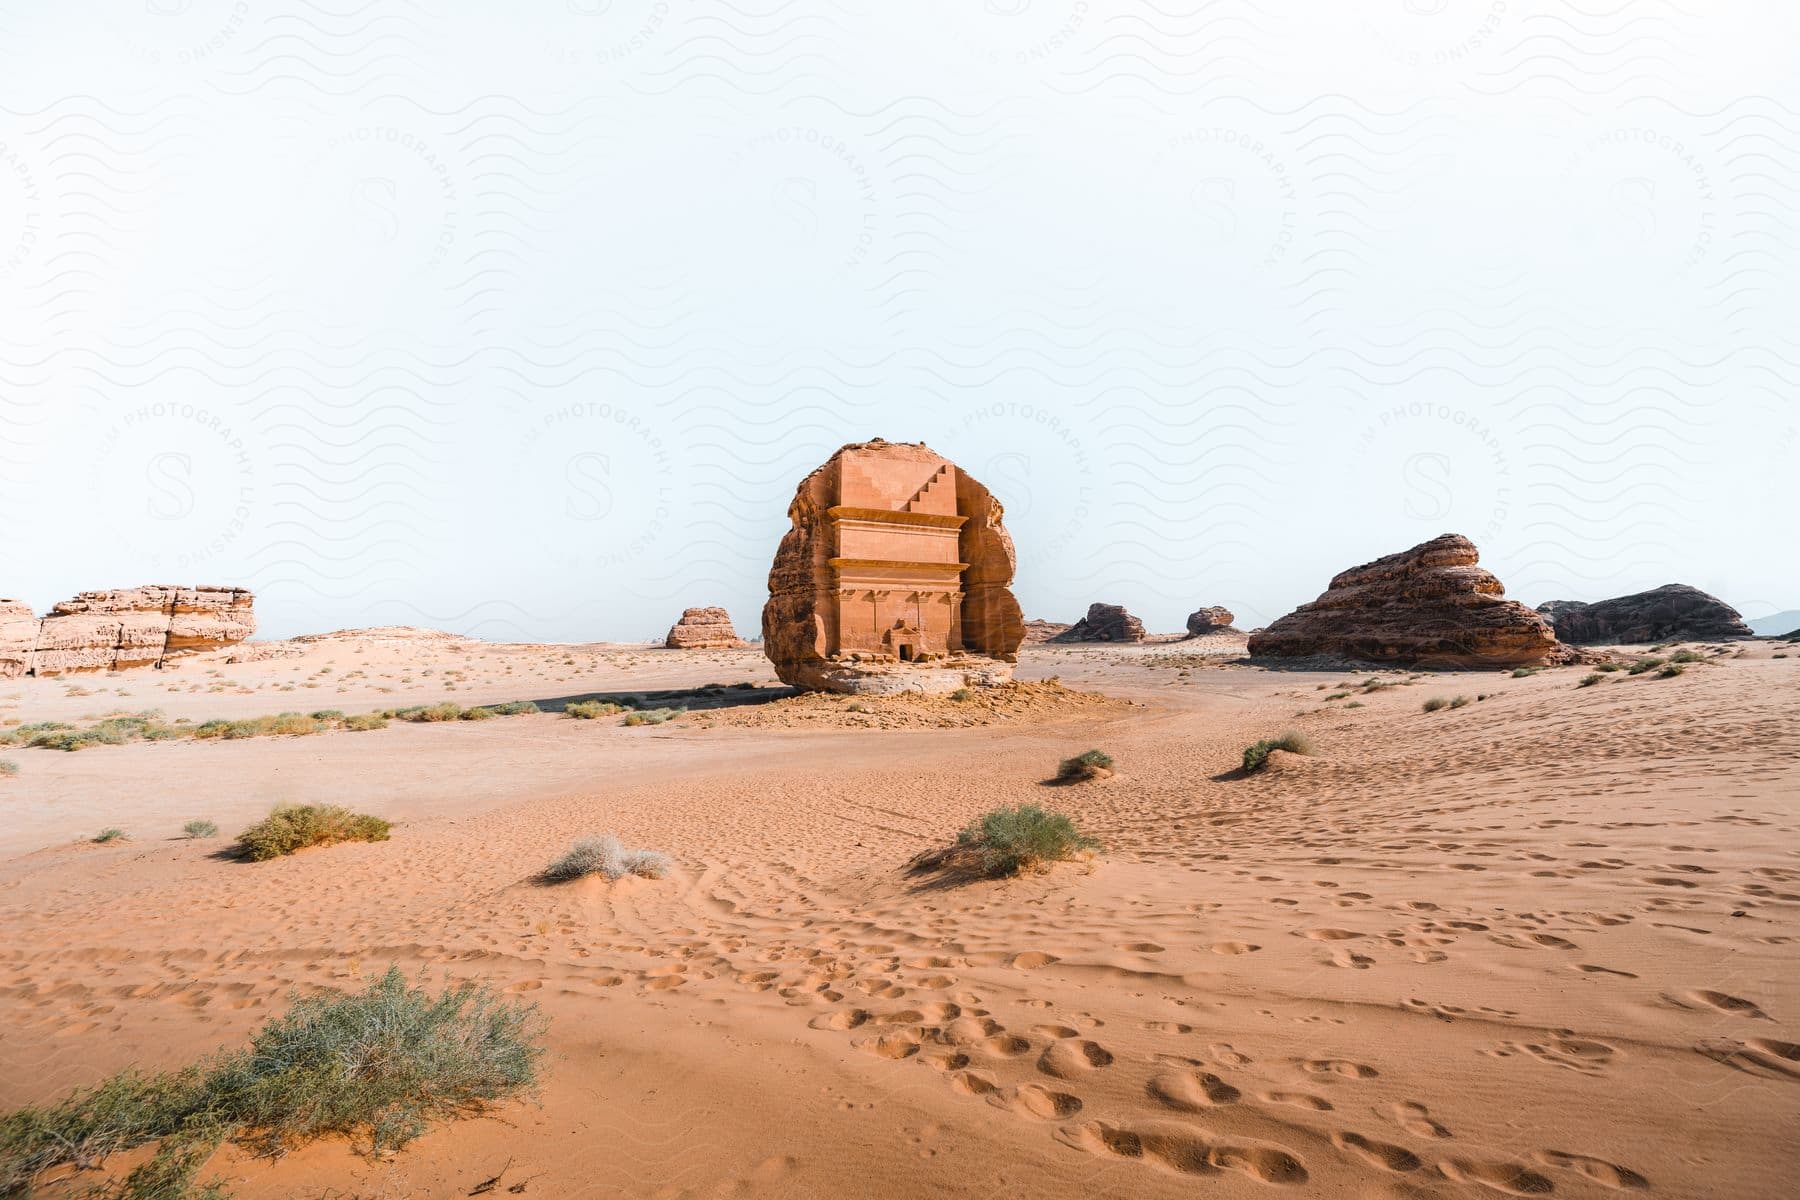 A desert with a crumbling structure scattered rocks footprints in the sand and sparse vegetation is home to various rock formations